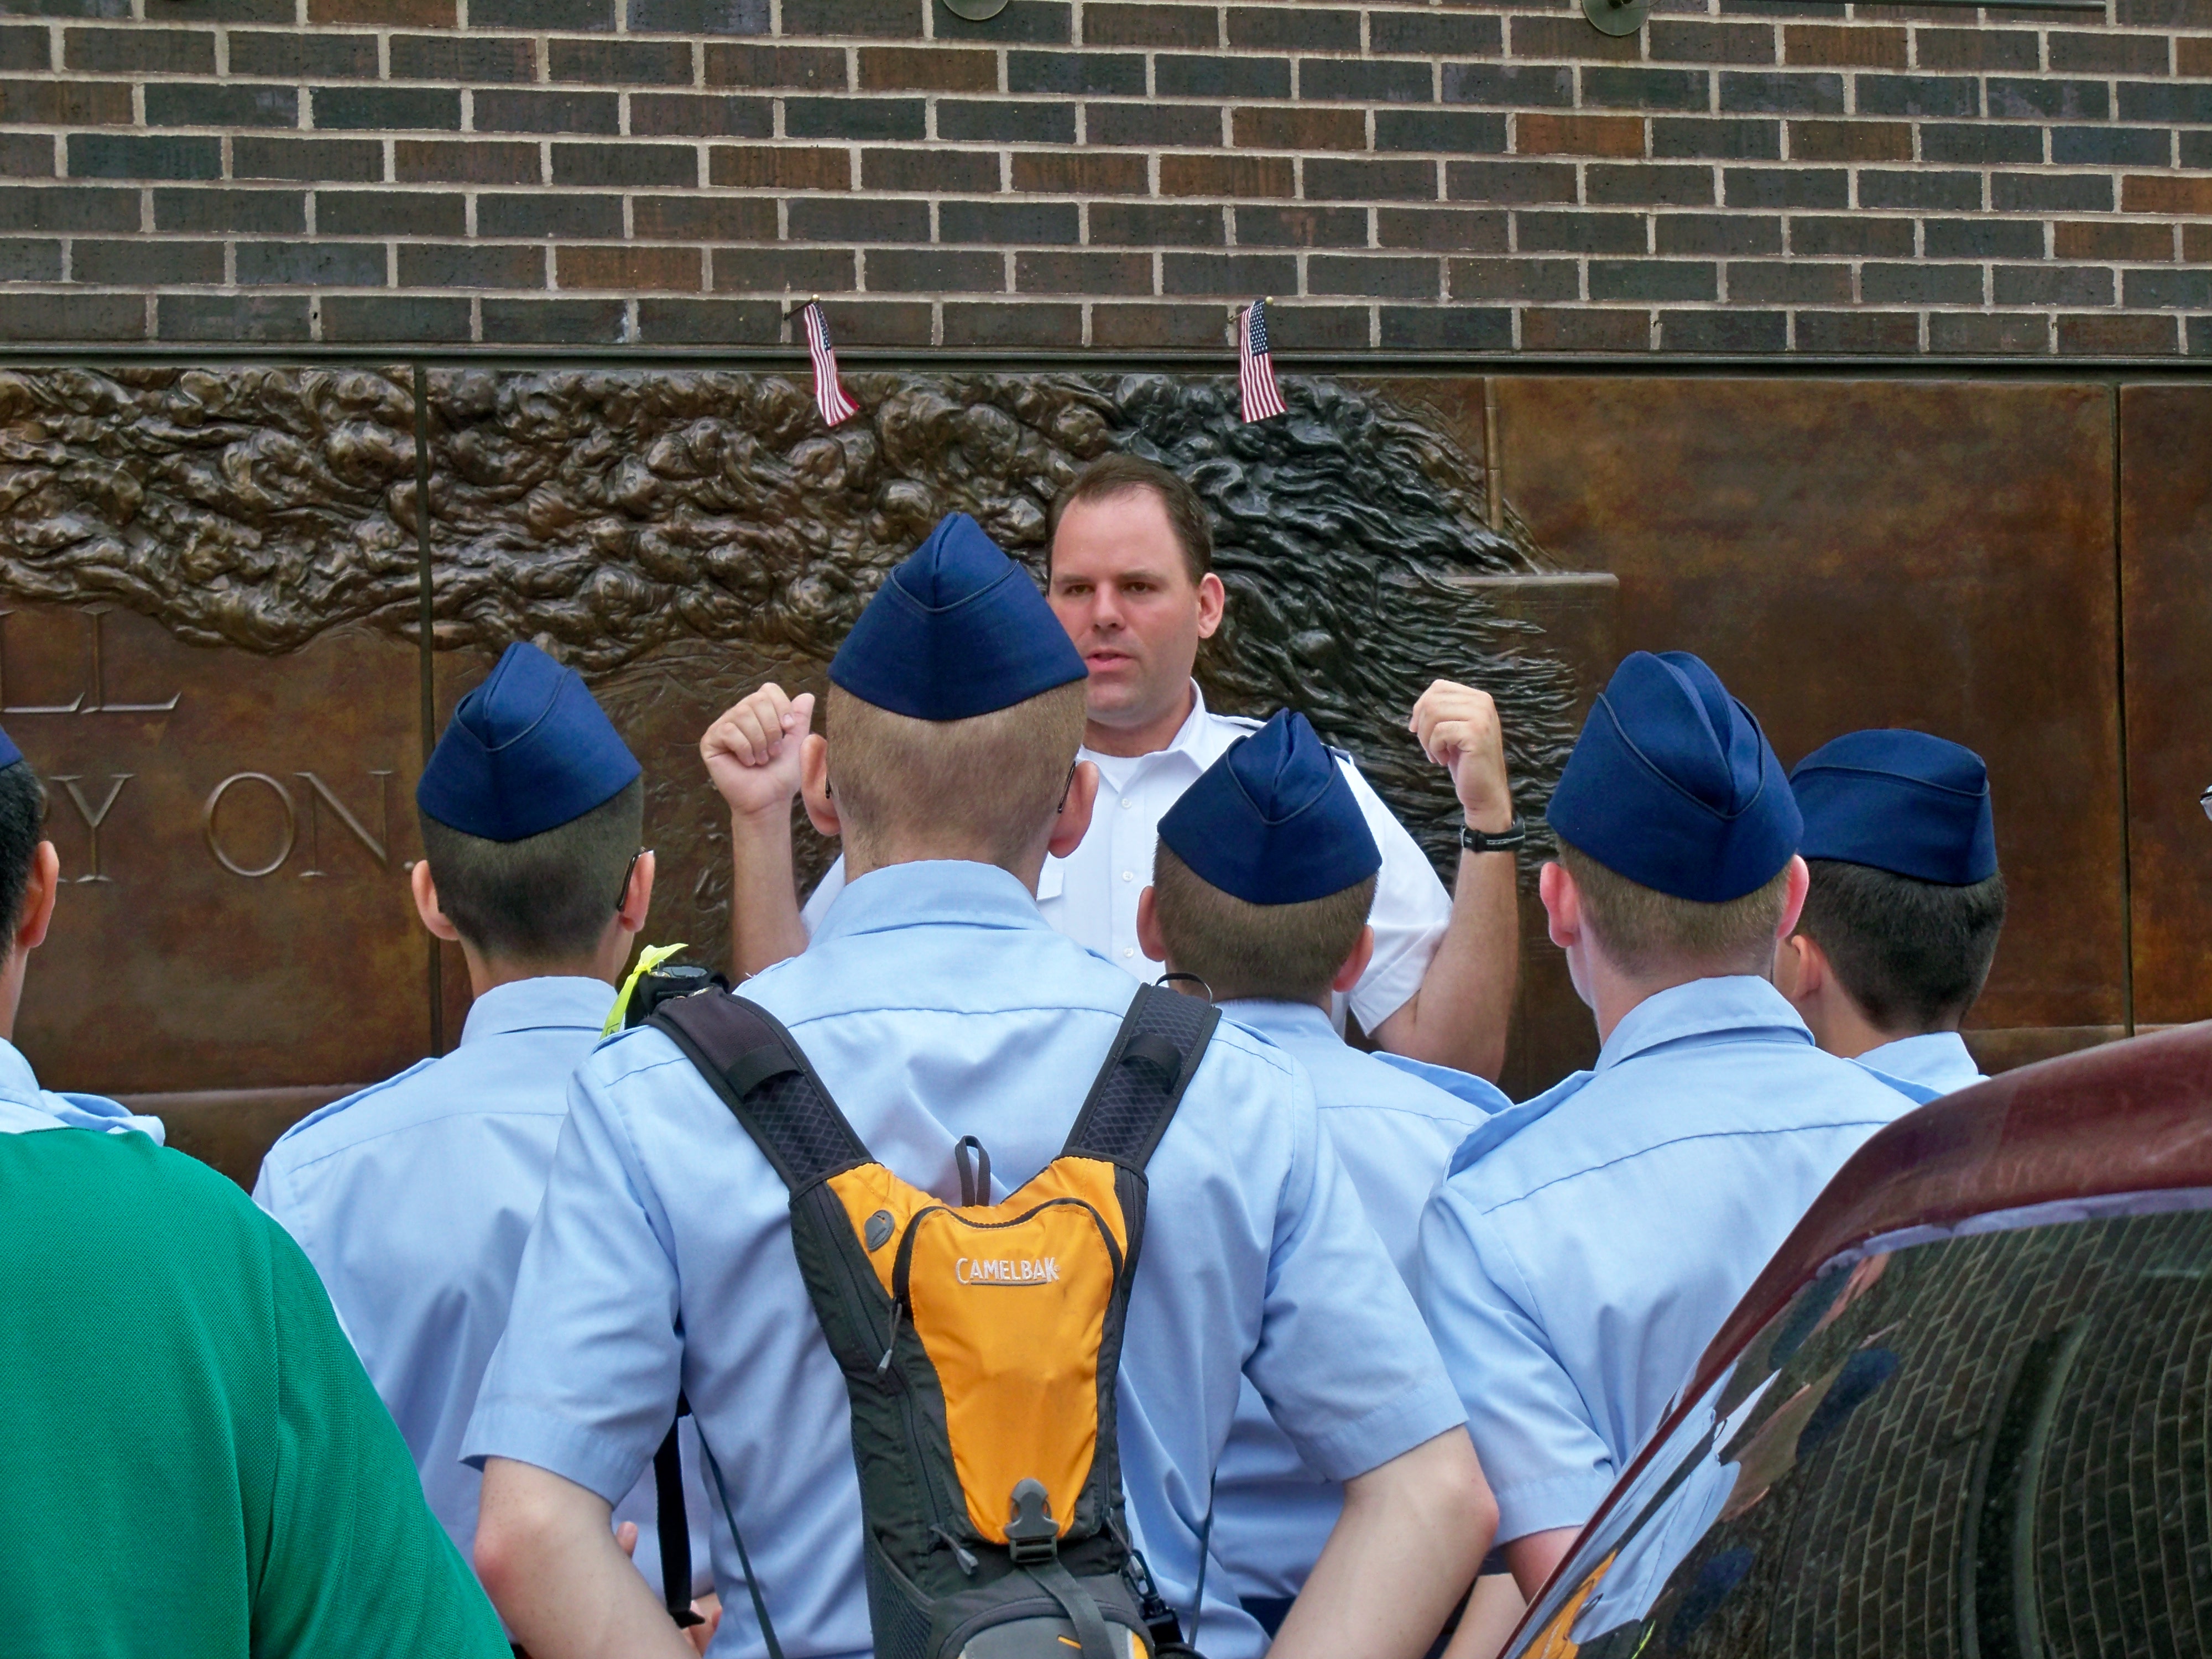 Lt. Roberts leads cadets on a visit to Ground Zero memorial